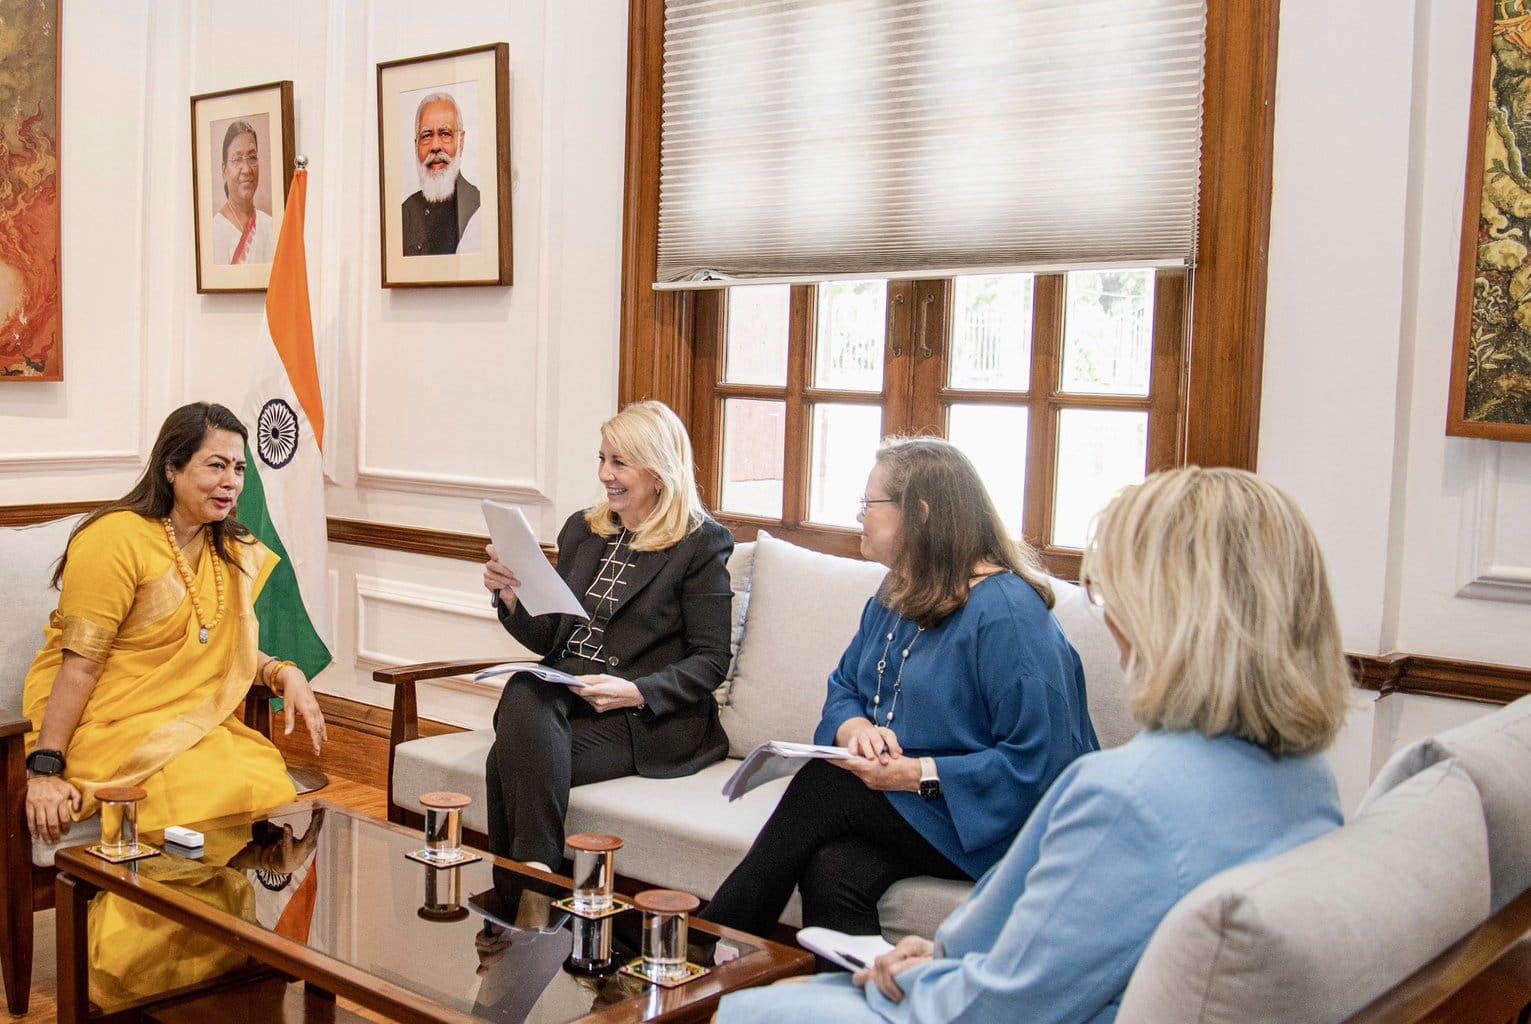 mos lekhi catherine russel discuss strengthening india unicef partnership 1 – The News Mill